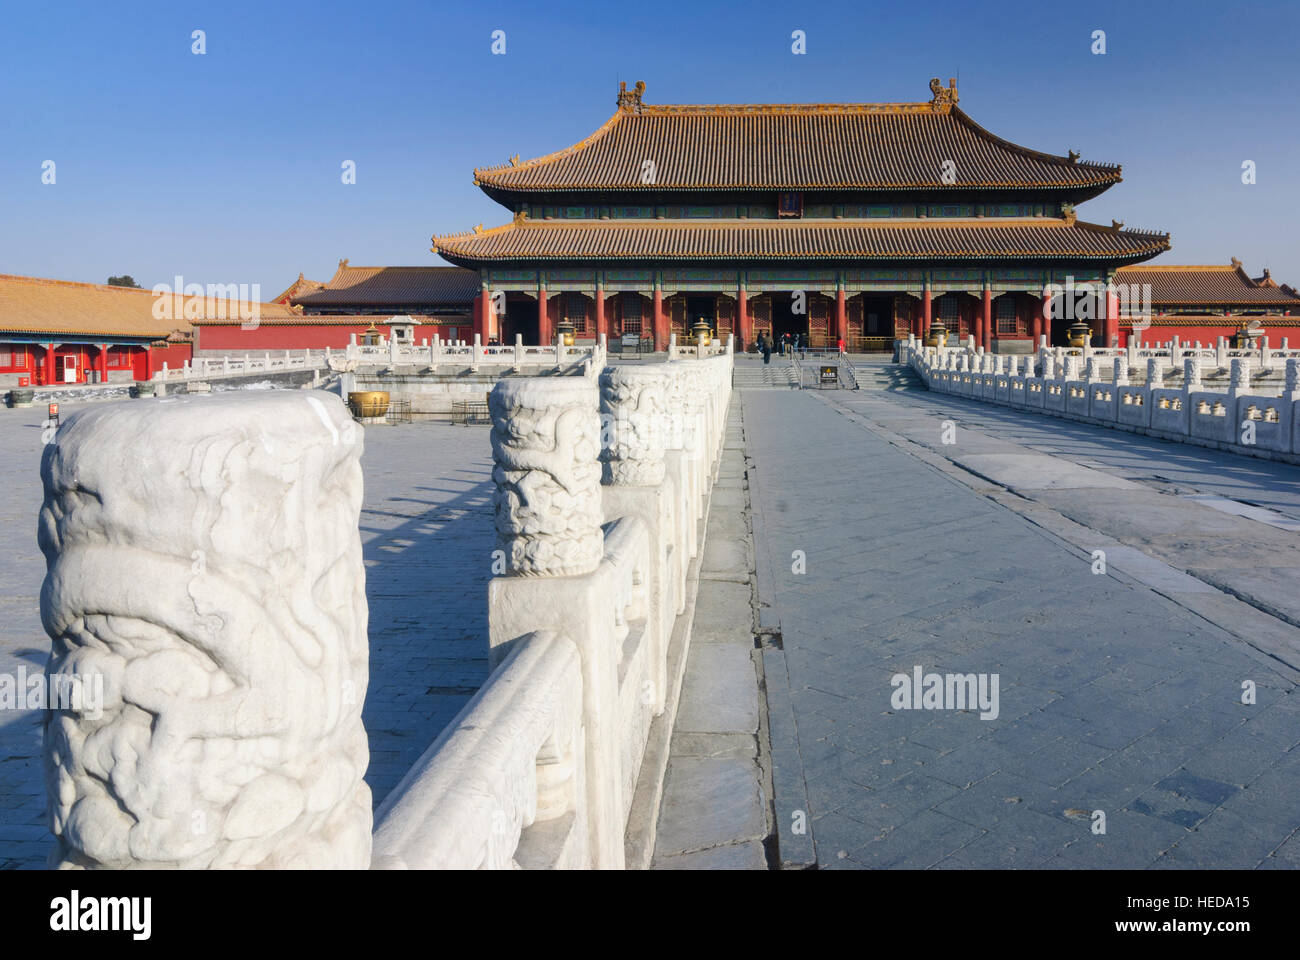 Peking: Forbidden City (Imperial Palace); Palace of Heavenly Purity, Beijing, China Stock Photo